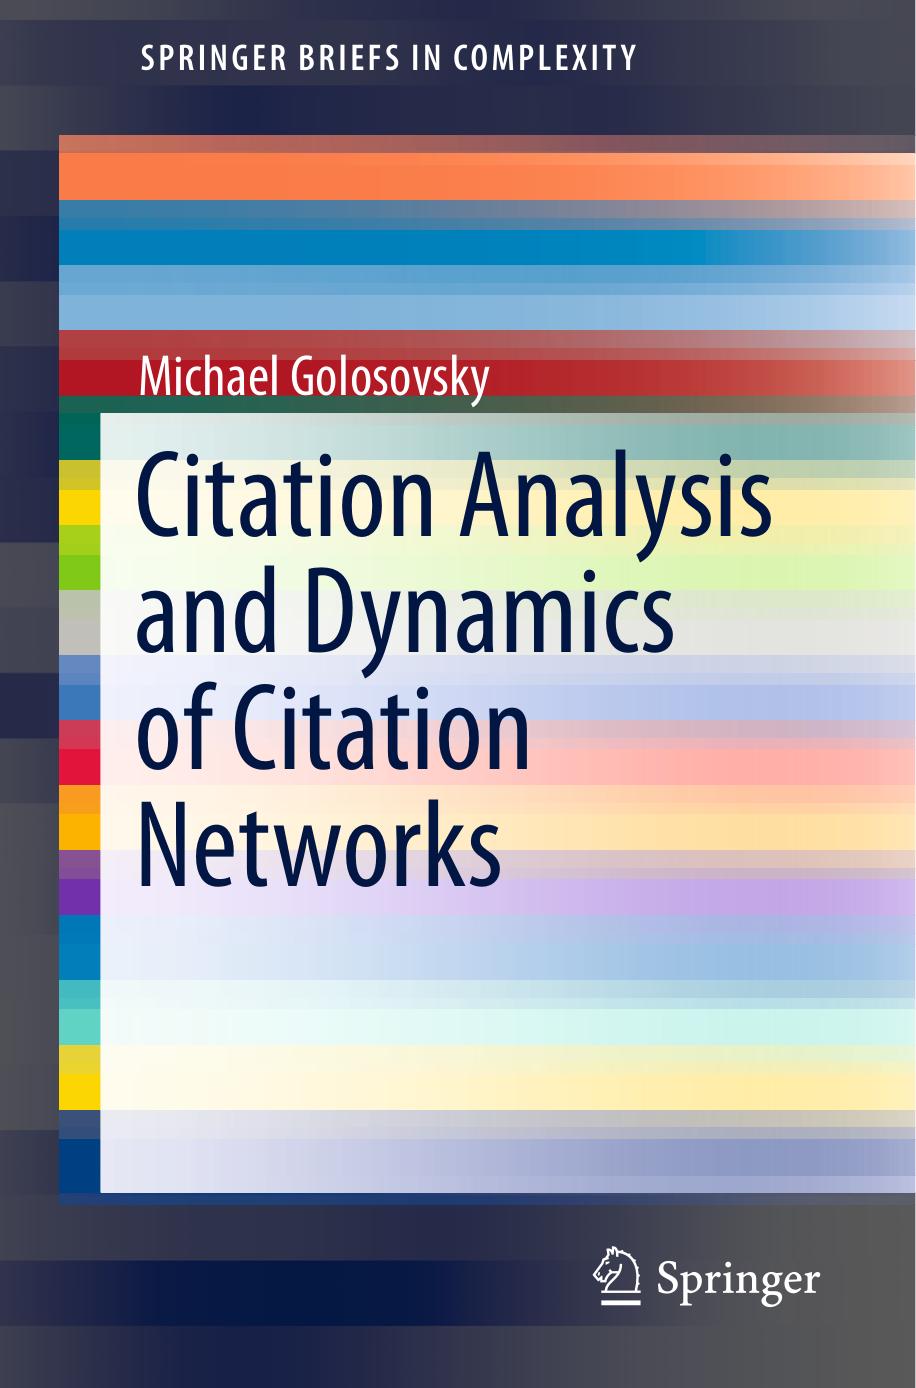 Citation Analysis and Dynamics of Citation Networks by Michael Golosovsky